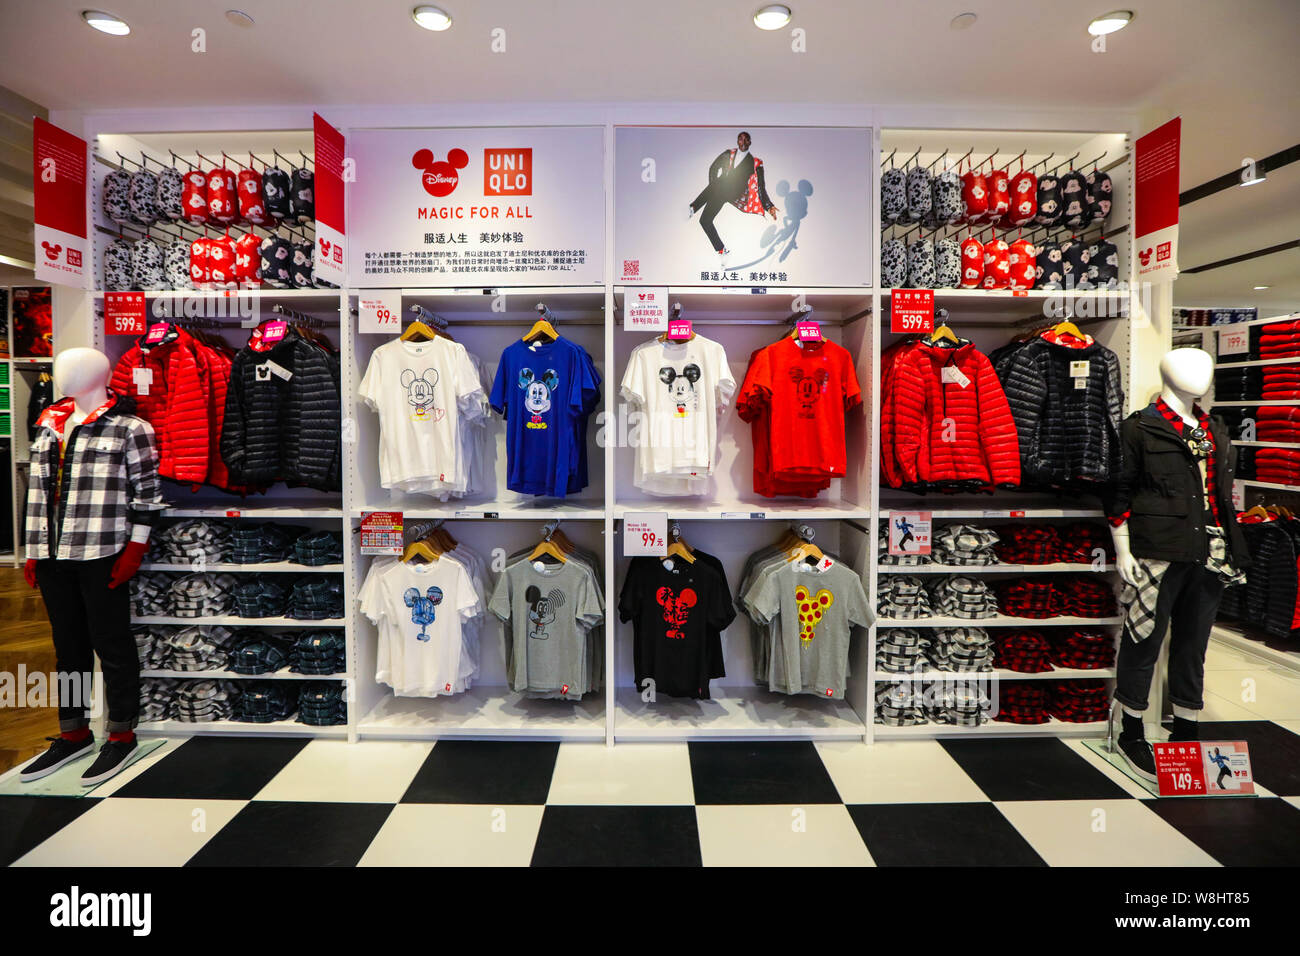 T Shirts And Jackets Of Magic For All Series Are For Sale At The Uniqlo S Disney Inspired Concept Store In Shanghai China 29 September 15 Uni Stock Photo Alamy